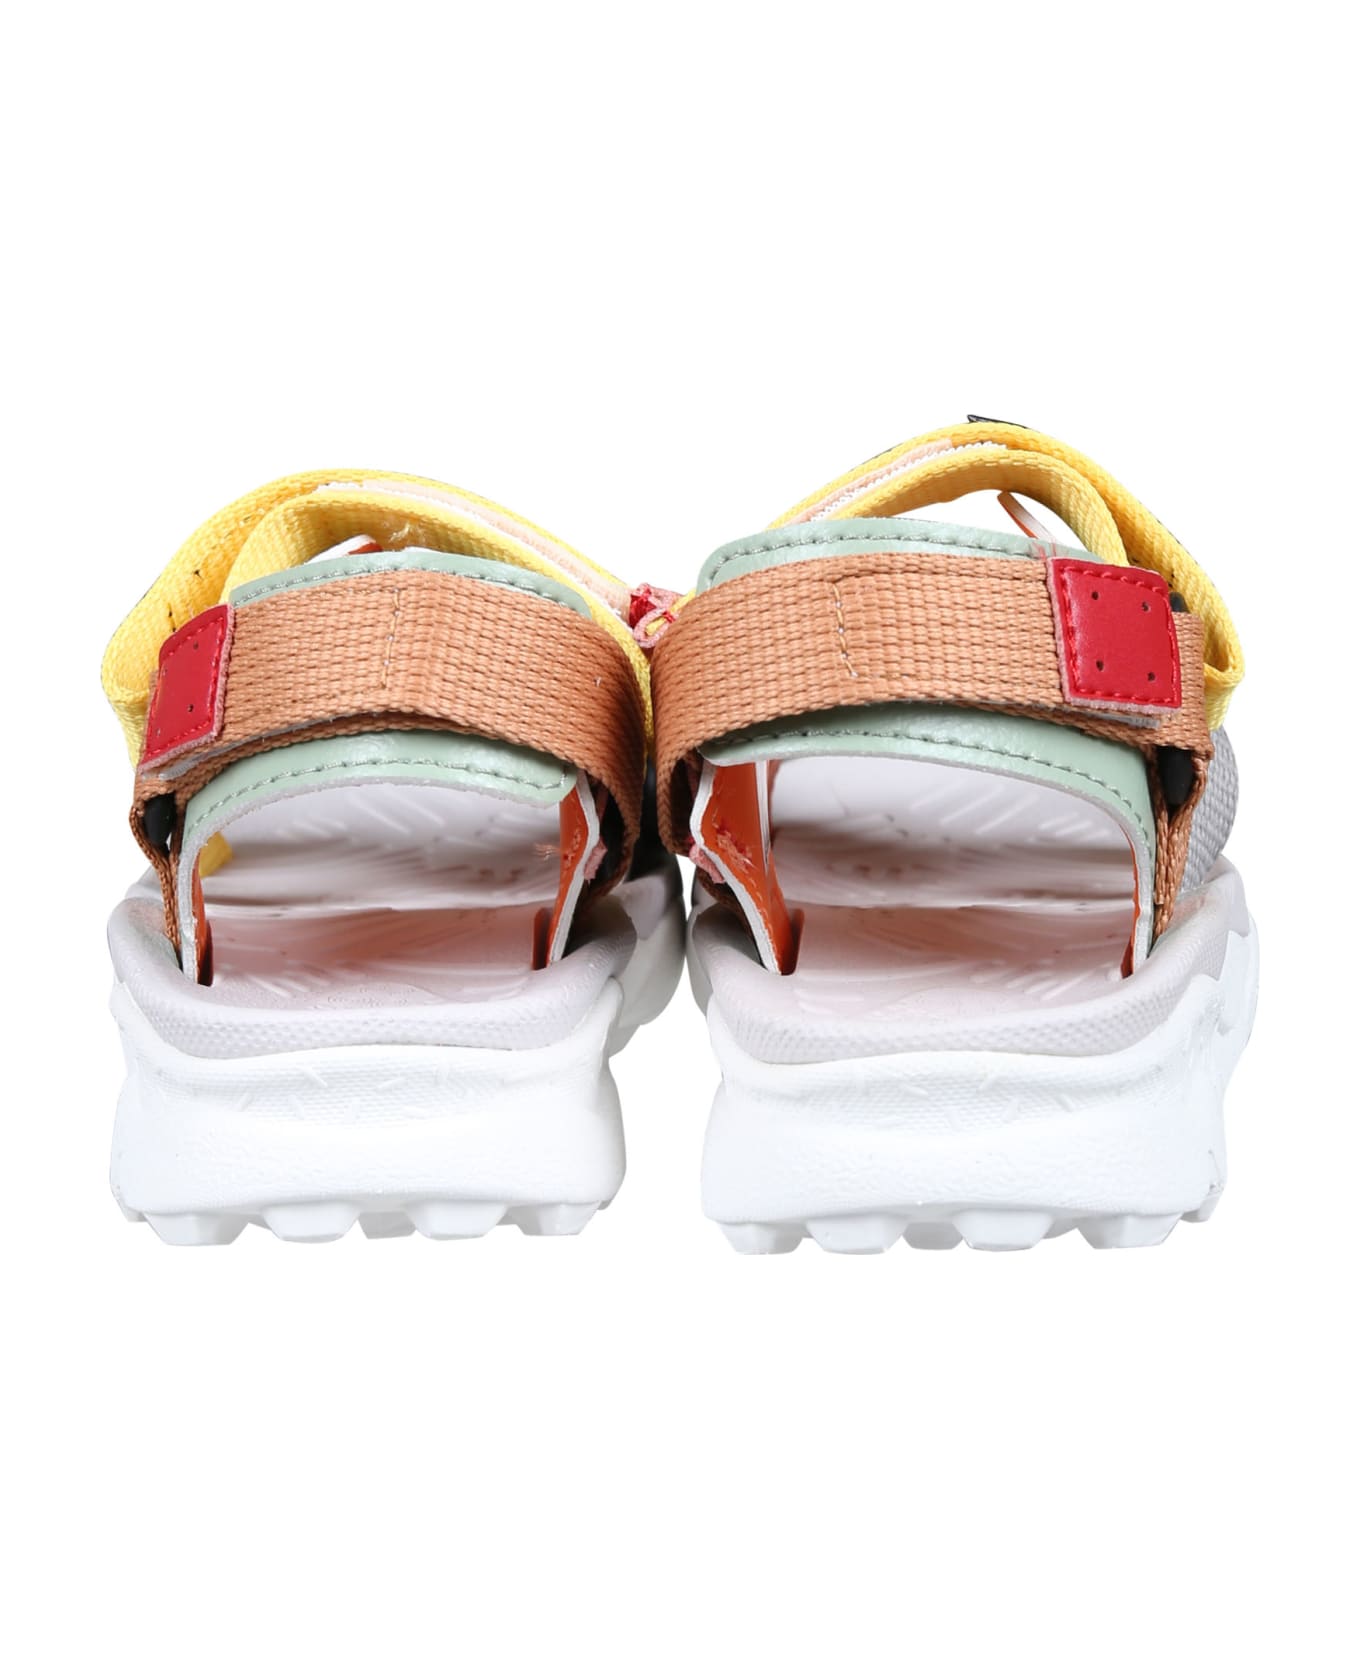 Flower Mountain Multicolor Nazca Sandals For Boy With Logo - Multicolor